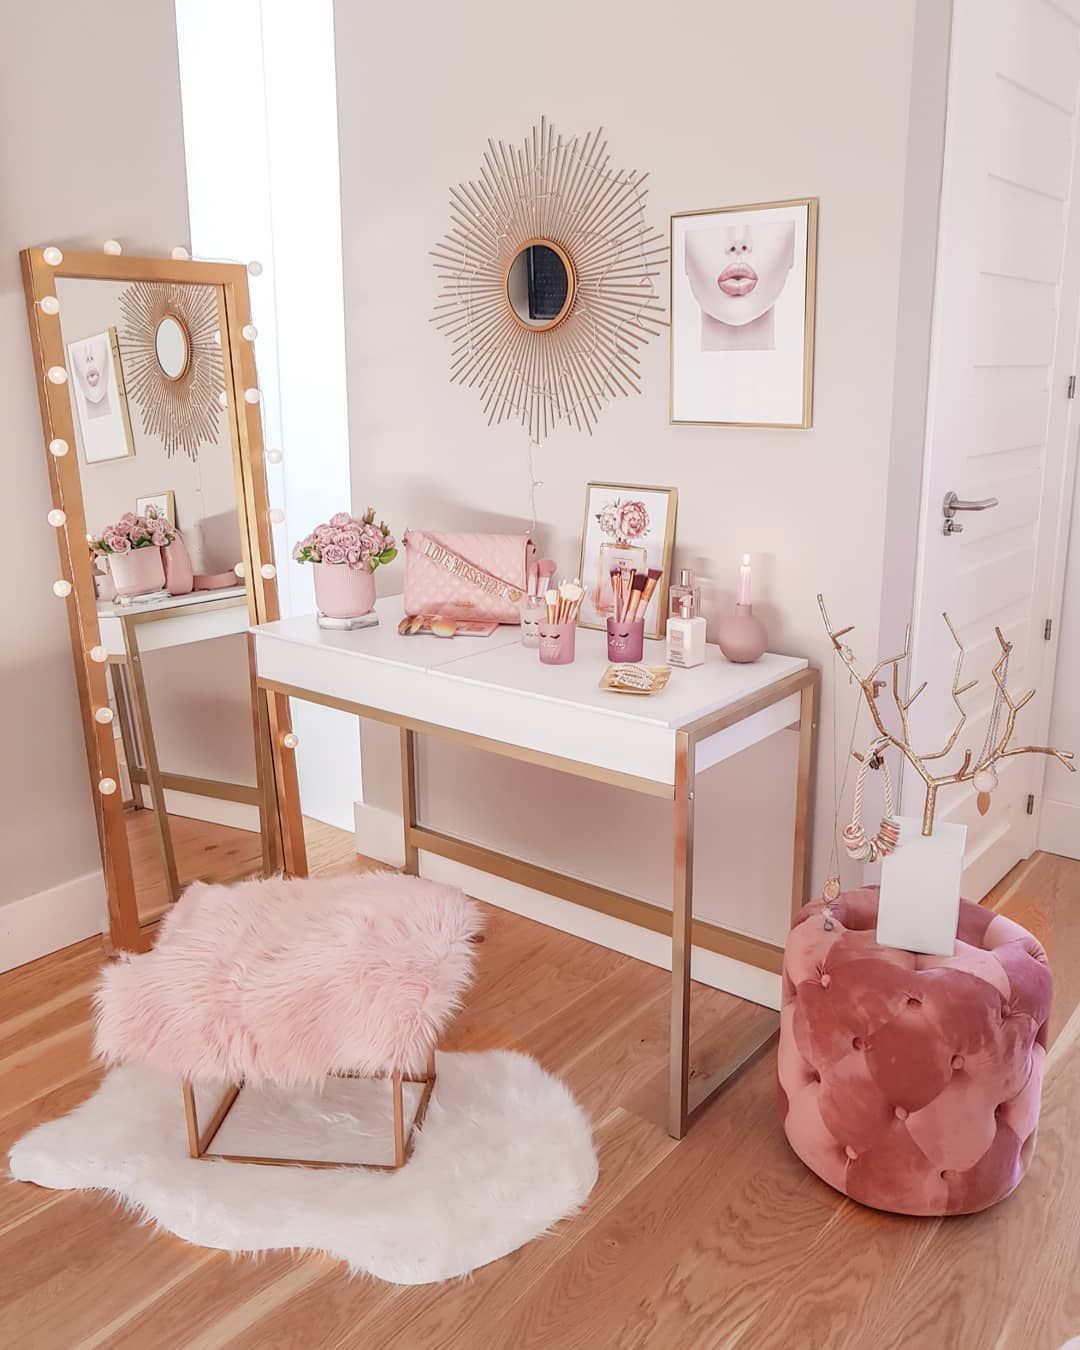 Cute house ideas pink and gold vanity corner -   11 room decor Pink small spaces ideas